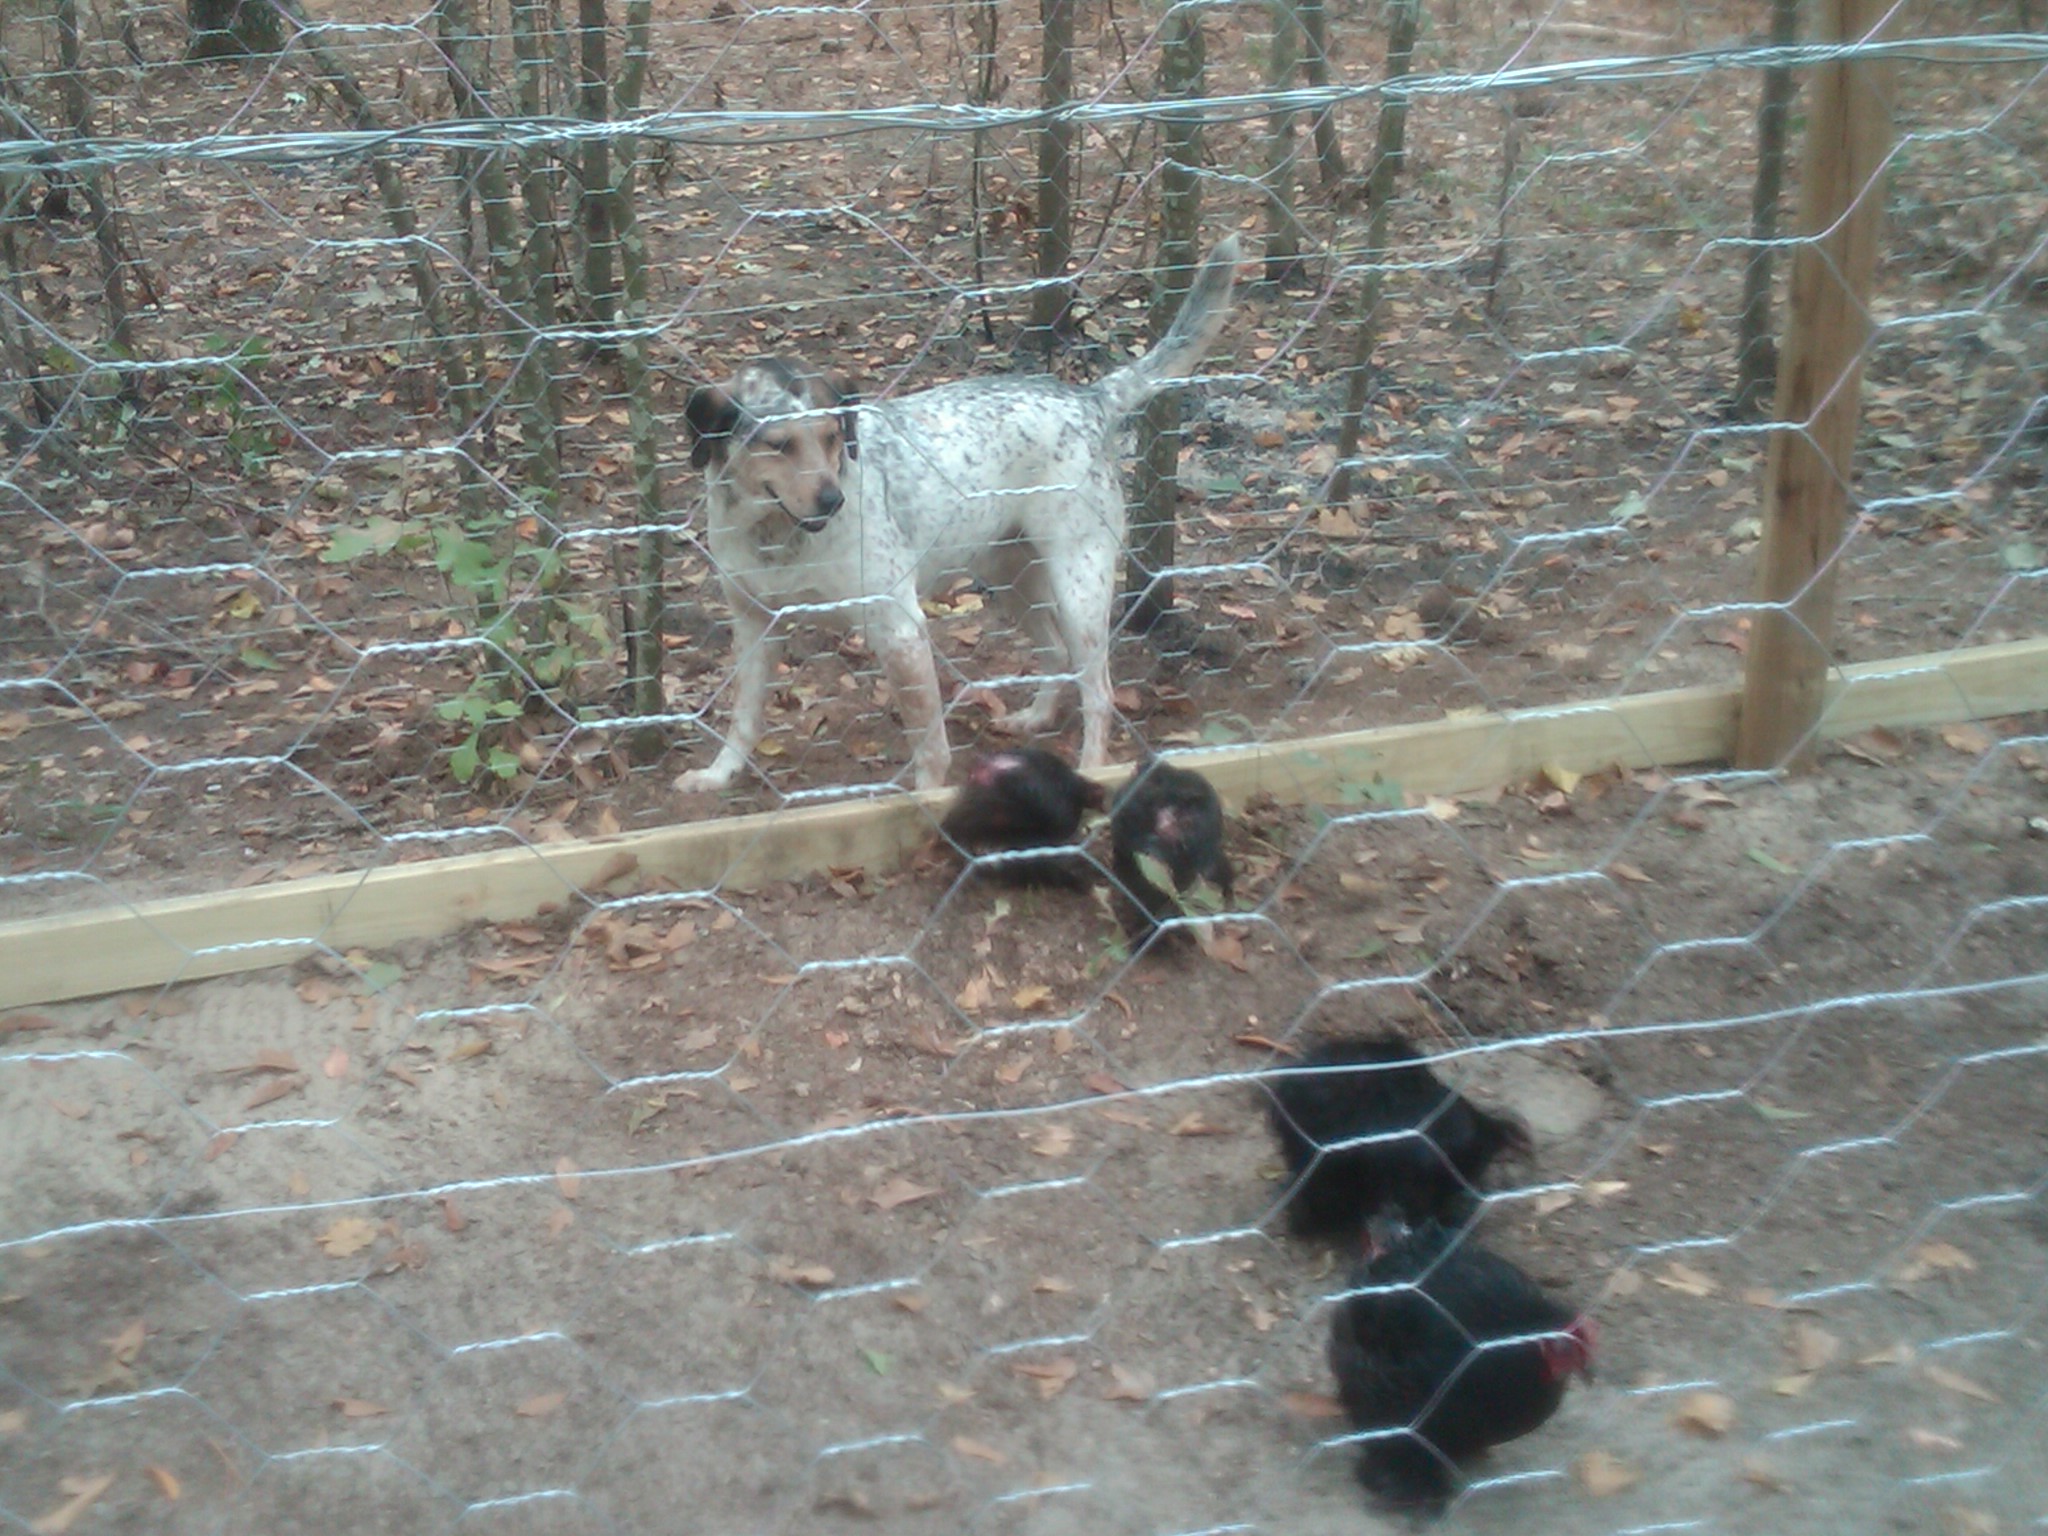 One of our 5 dogs country seemed to take an instant mothering instinct towards the chickens and wouldn't let any of the other 4 dogs come near the pen.  Hope she's mothering them and not simply protecting what she see's as her food source.  lol